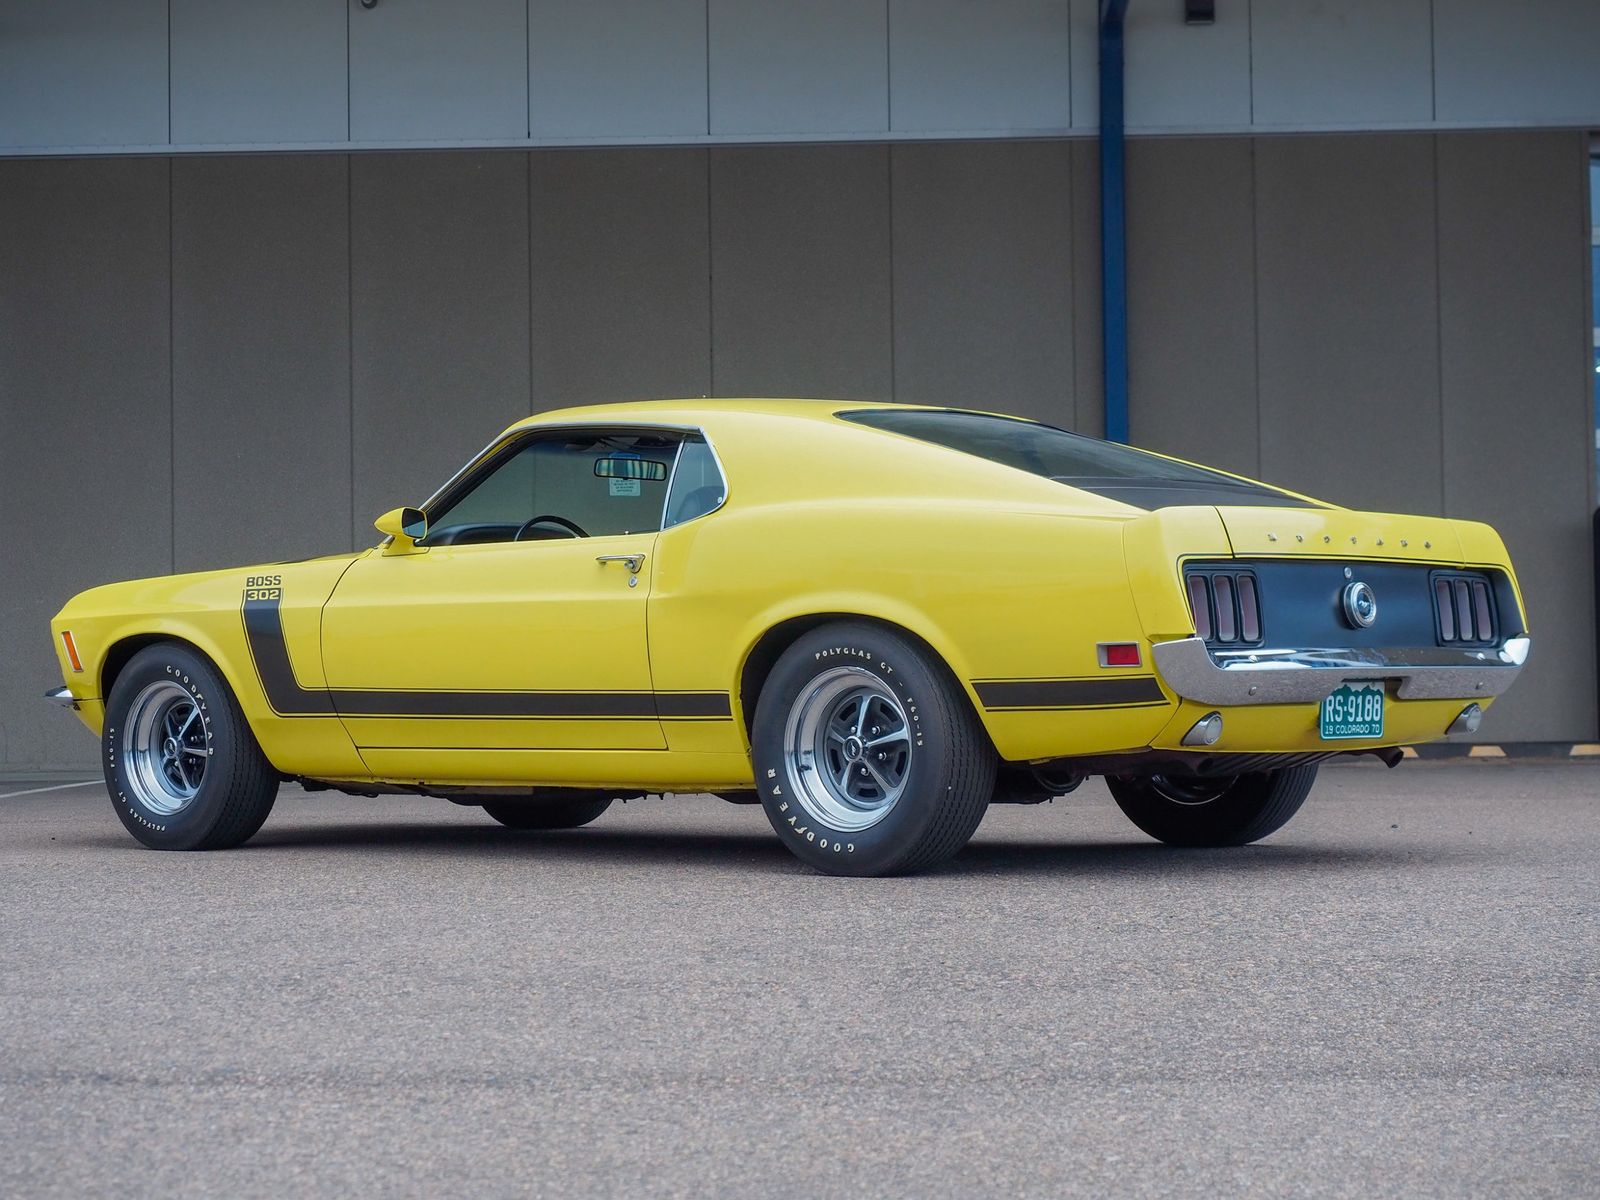 1970 Ford Mustang 2